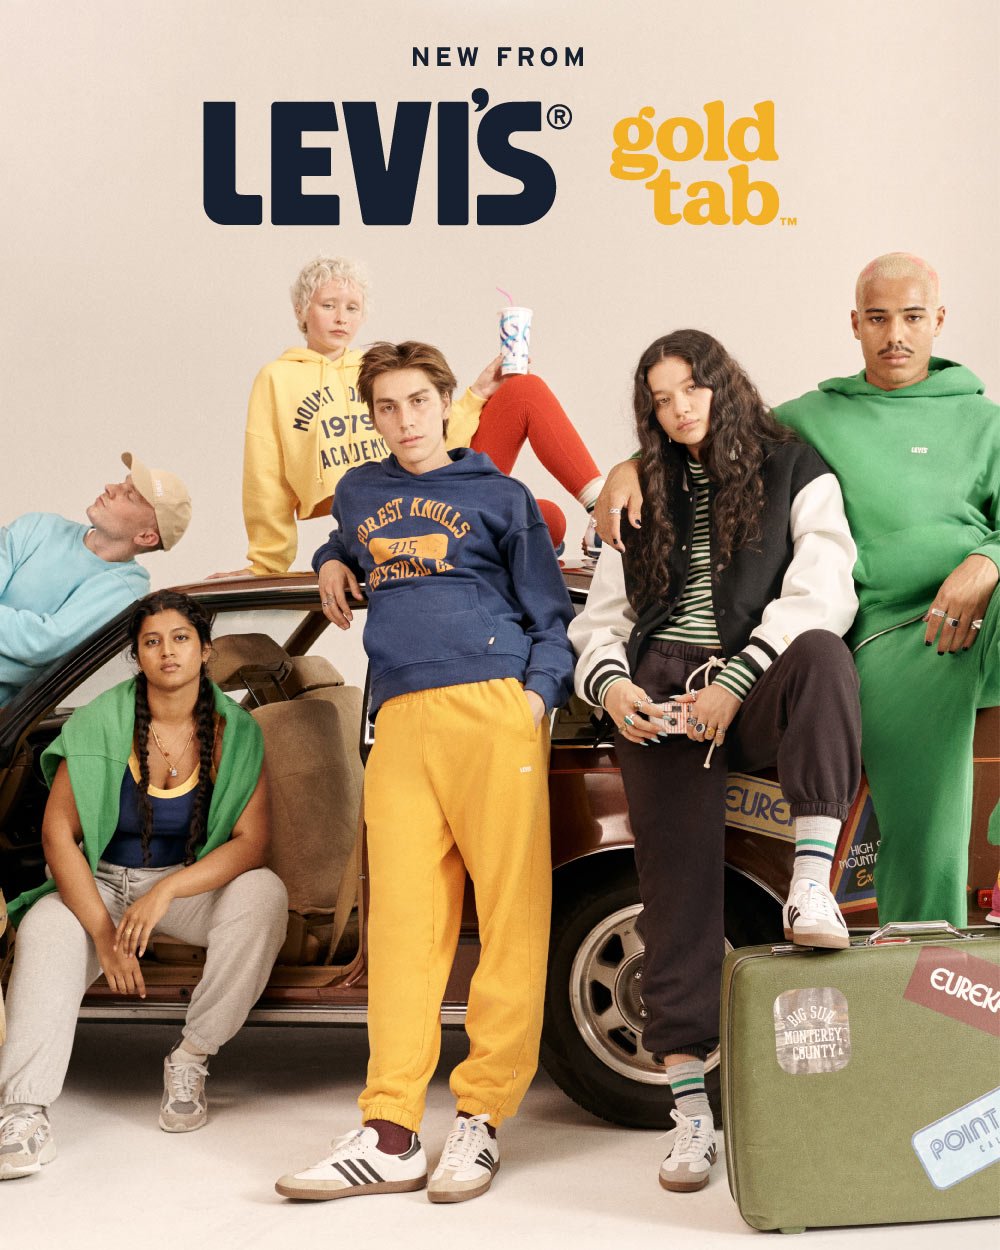 Levi's Gold Tab collection - Levi's Hong Kong